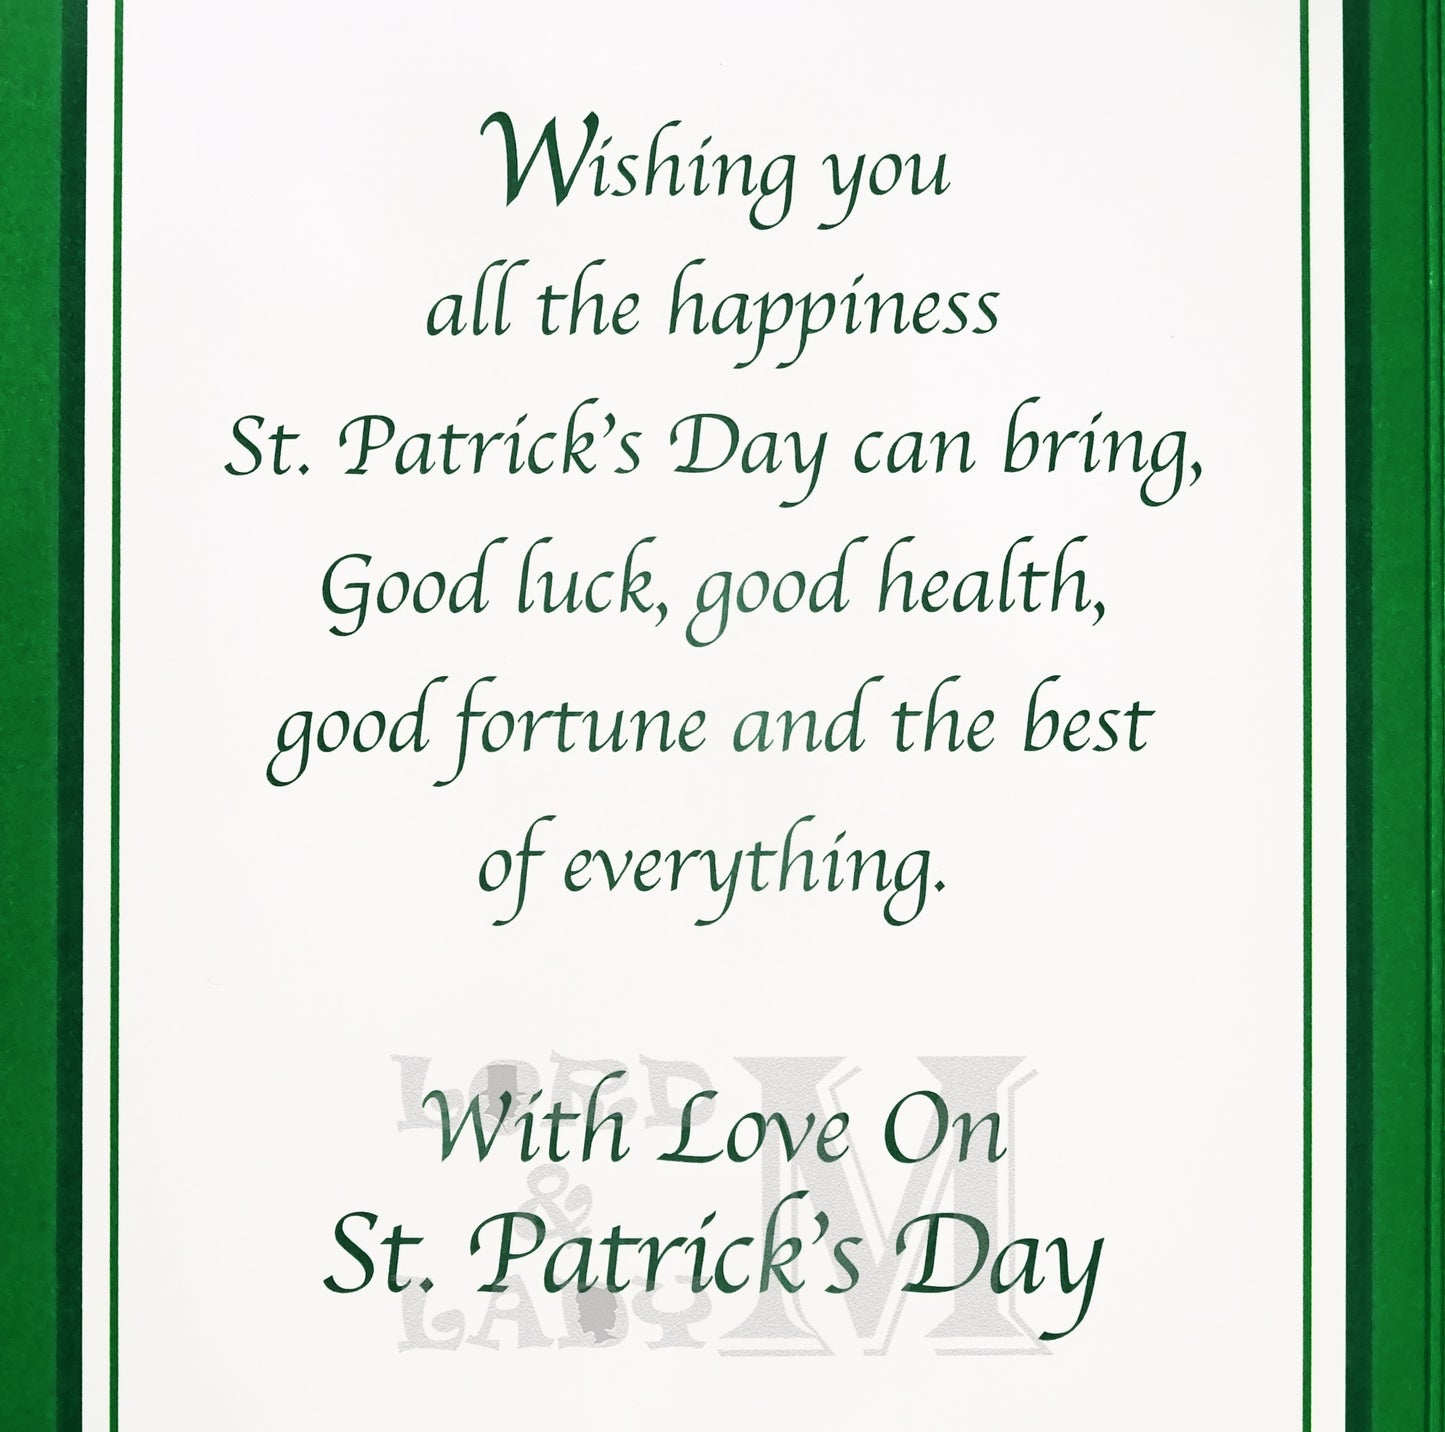 23cm - Just For You, Son, On St. Patrick's Day -BG